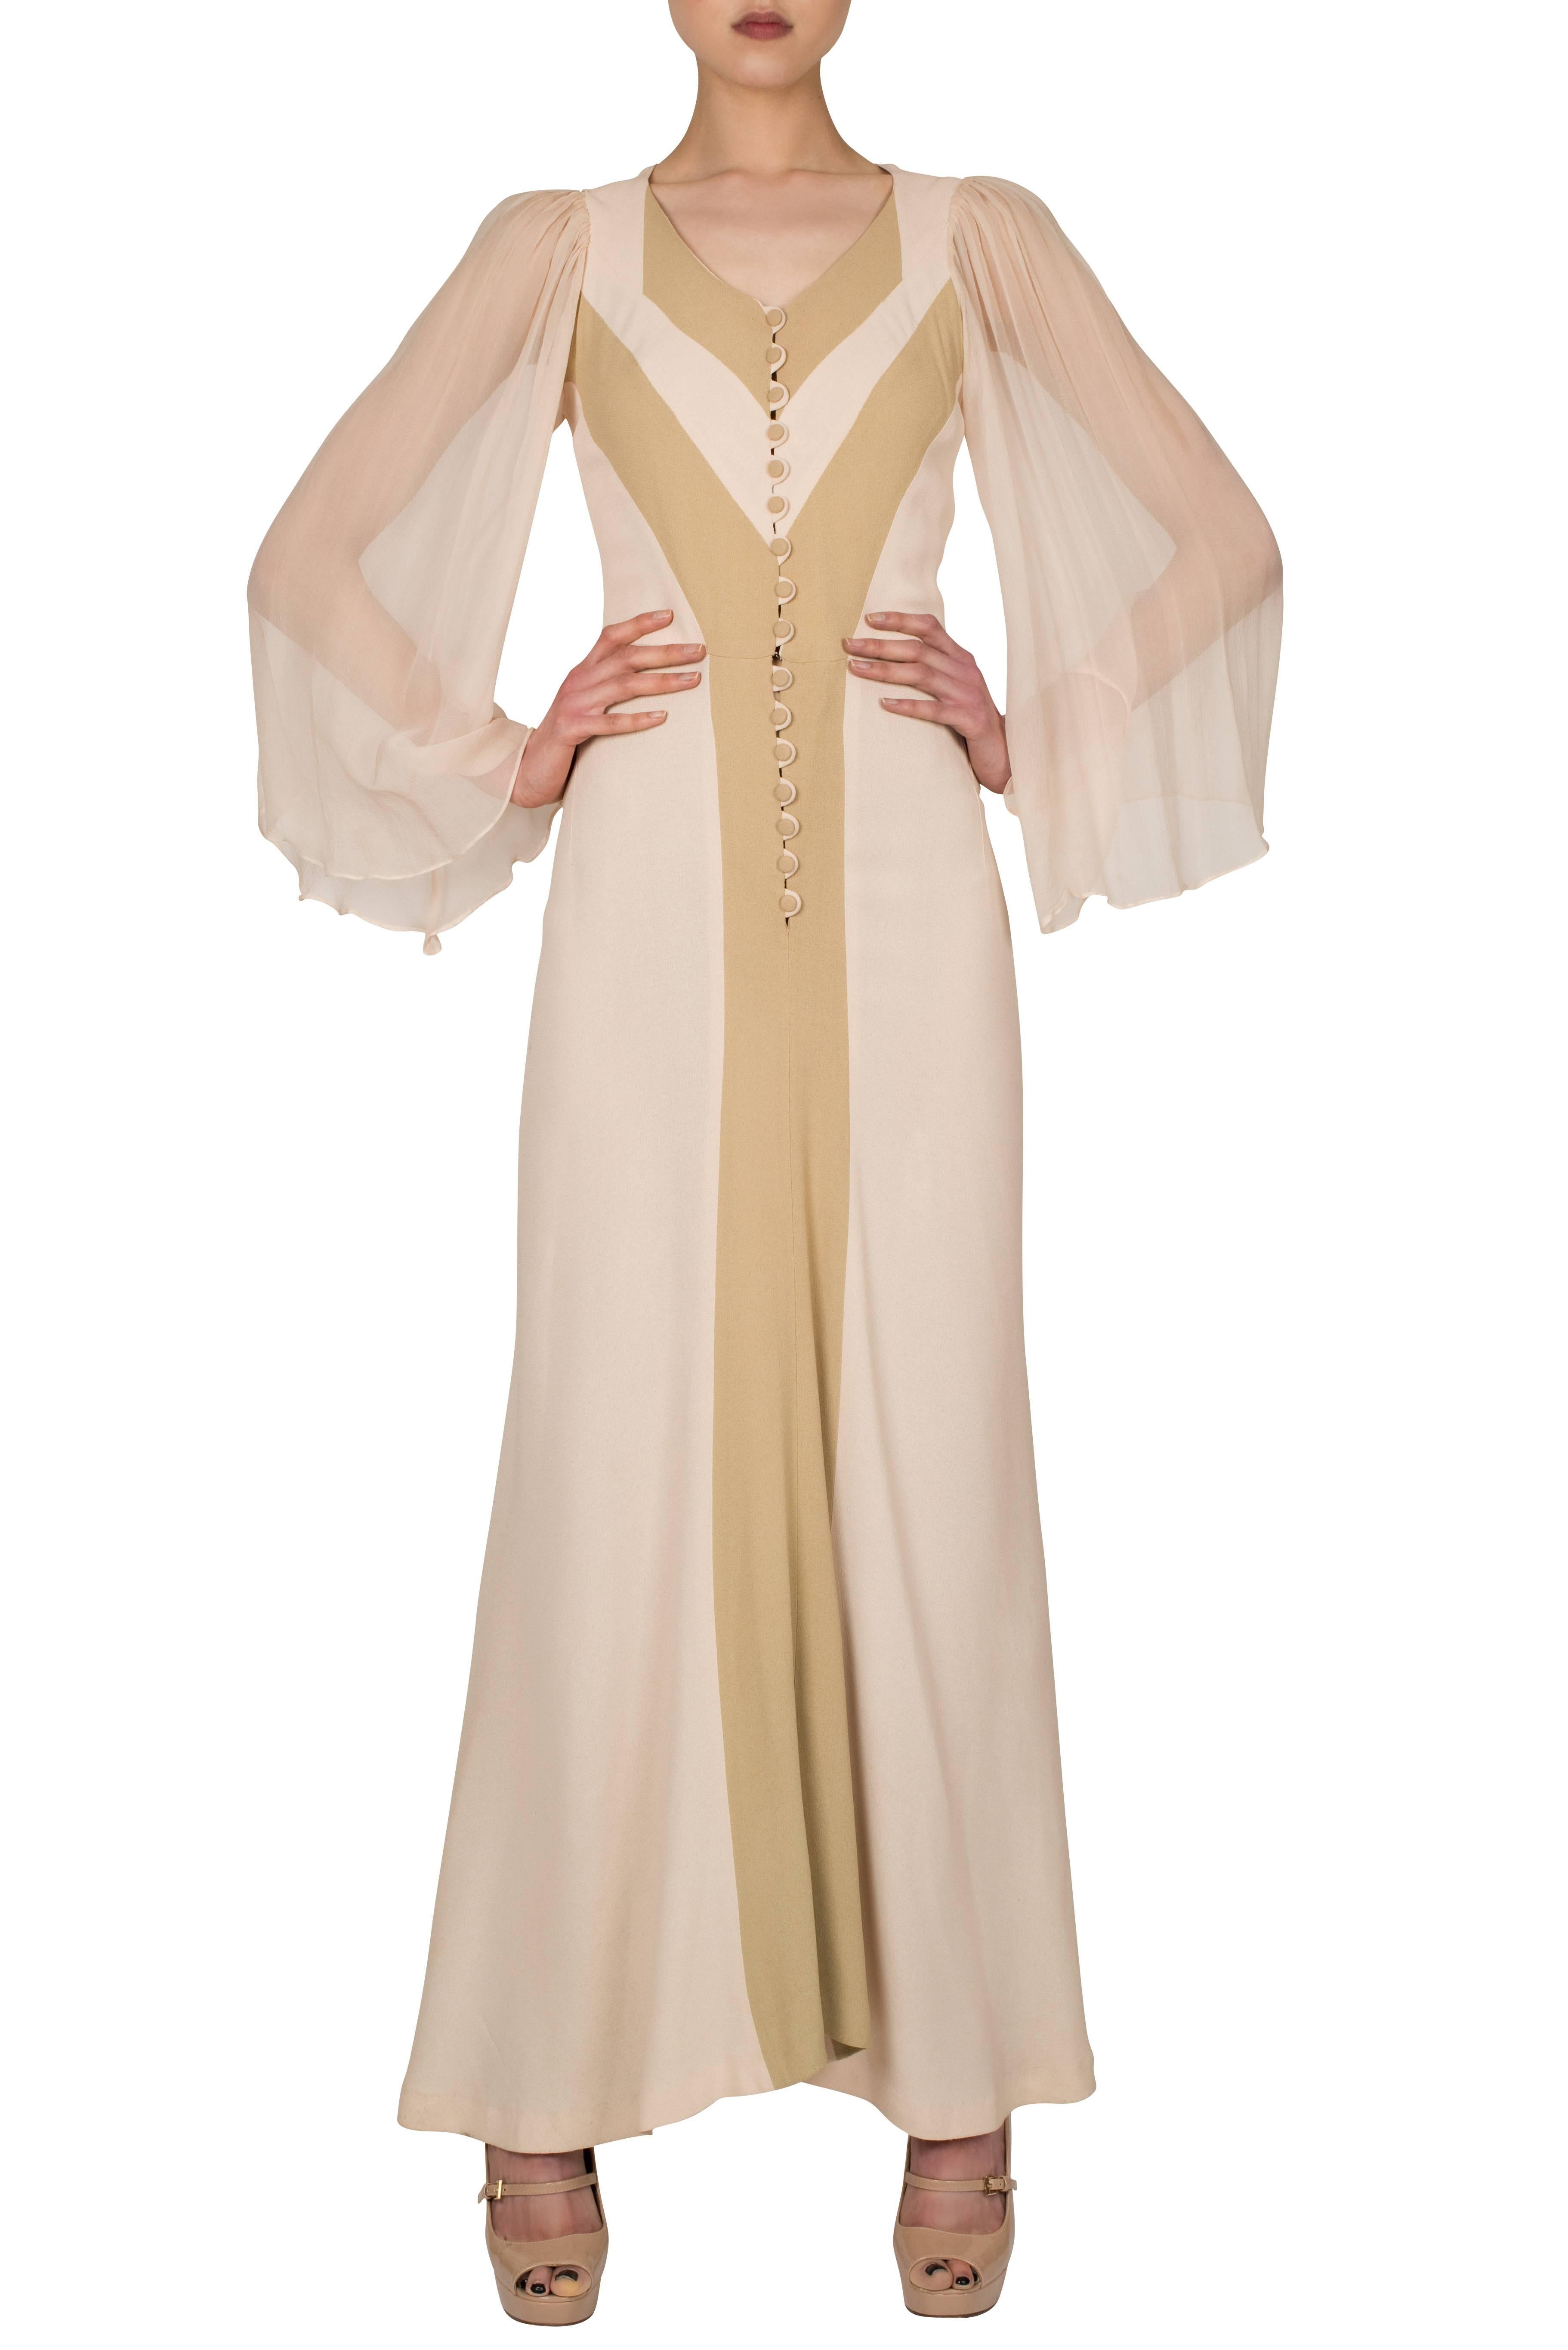 This 1970's Alice Pollock dress evokes the Déco style of the 1930’s whilst remaining true to its bohemian surroundings. The dress features a button down front, in ivory moss crepe with caramel colour vertical inserts adding to an elongated